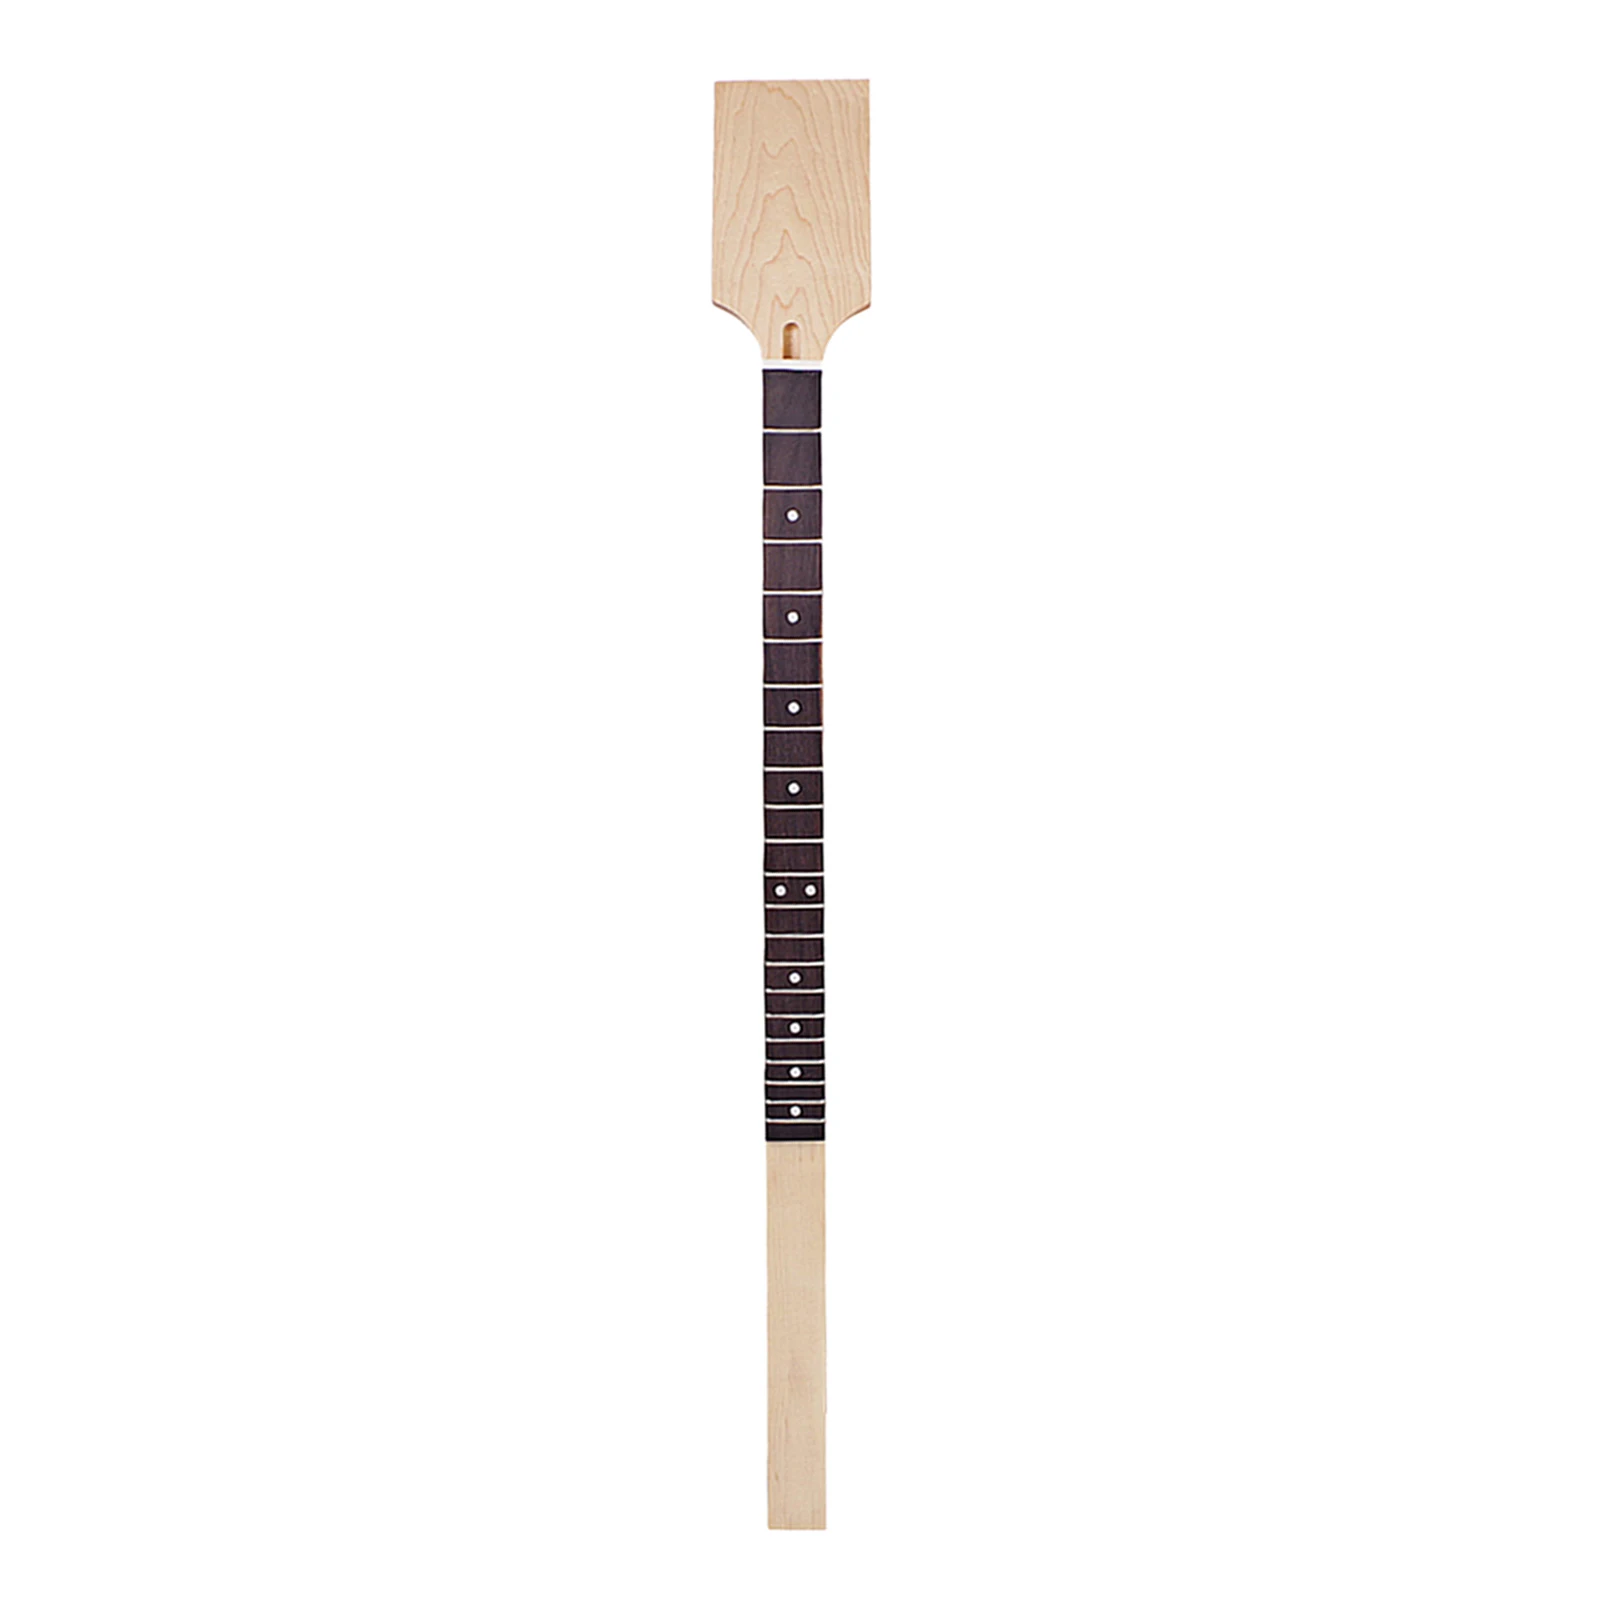 Unfinished 22 Frets Guitar Neck Neck Paddle Head Smooth Touch Gifts Parts